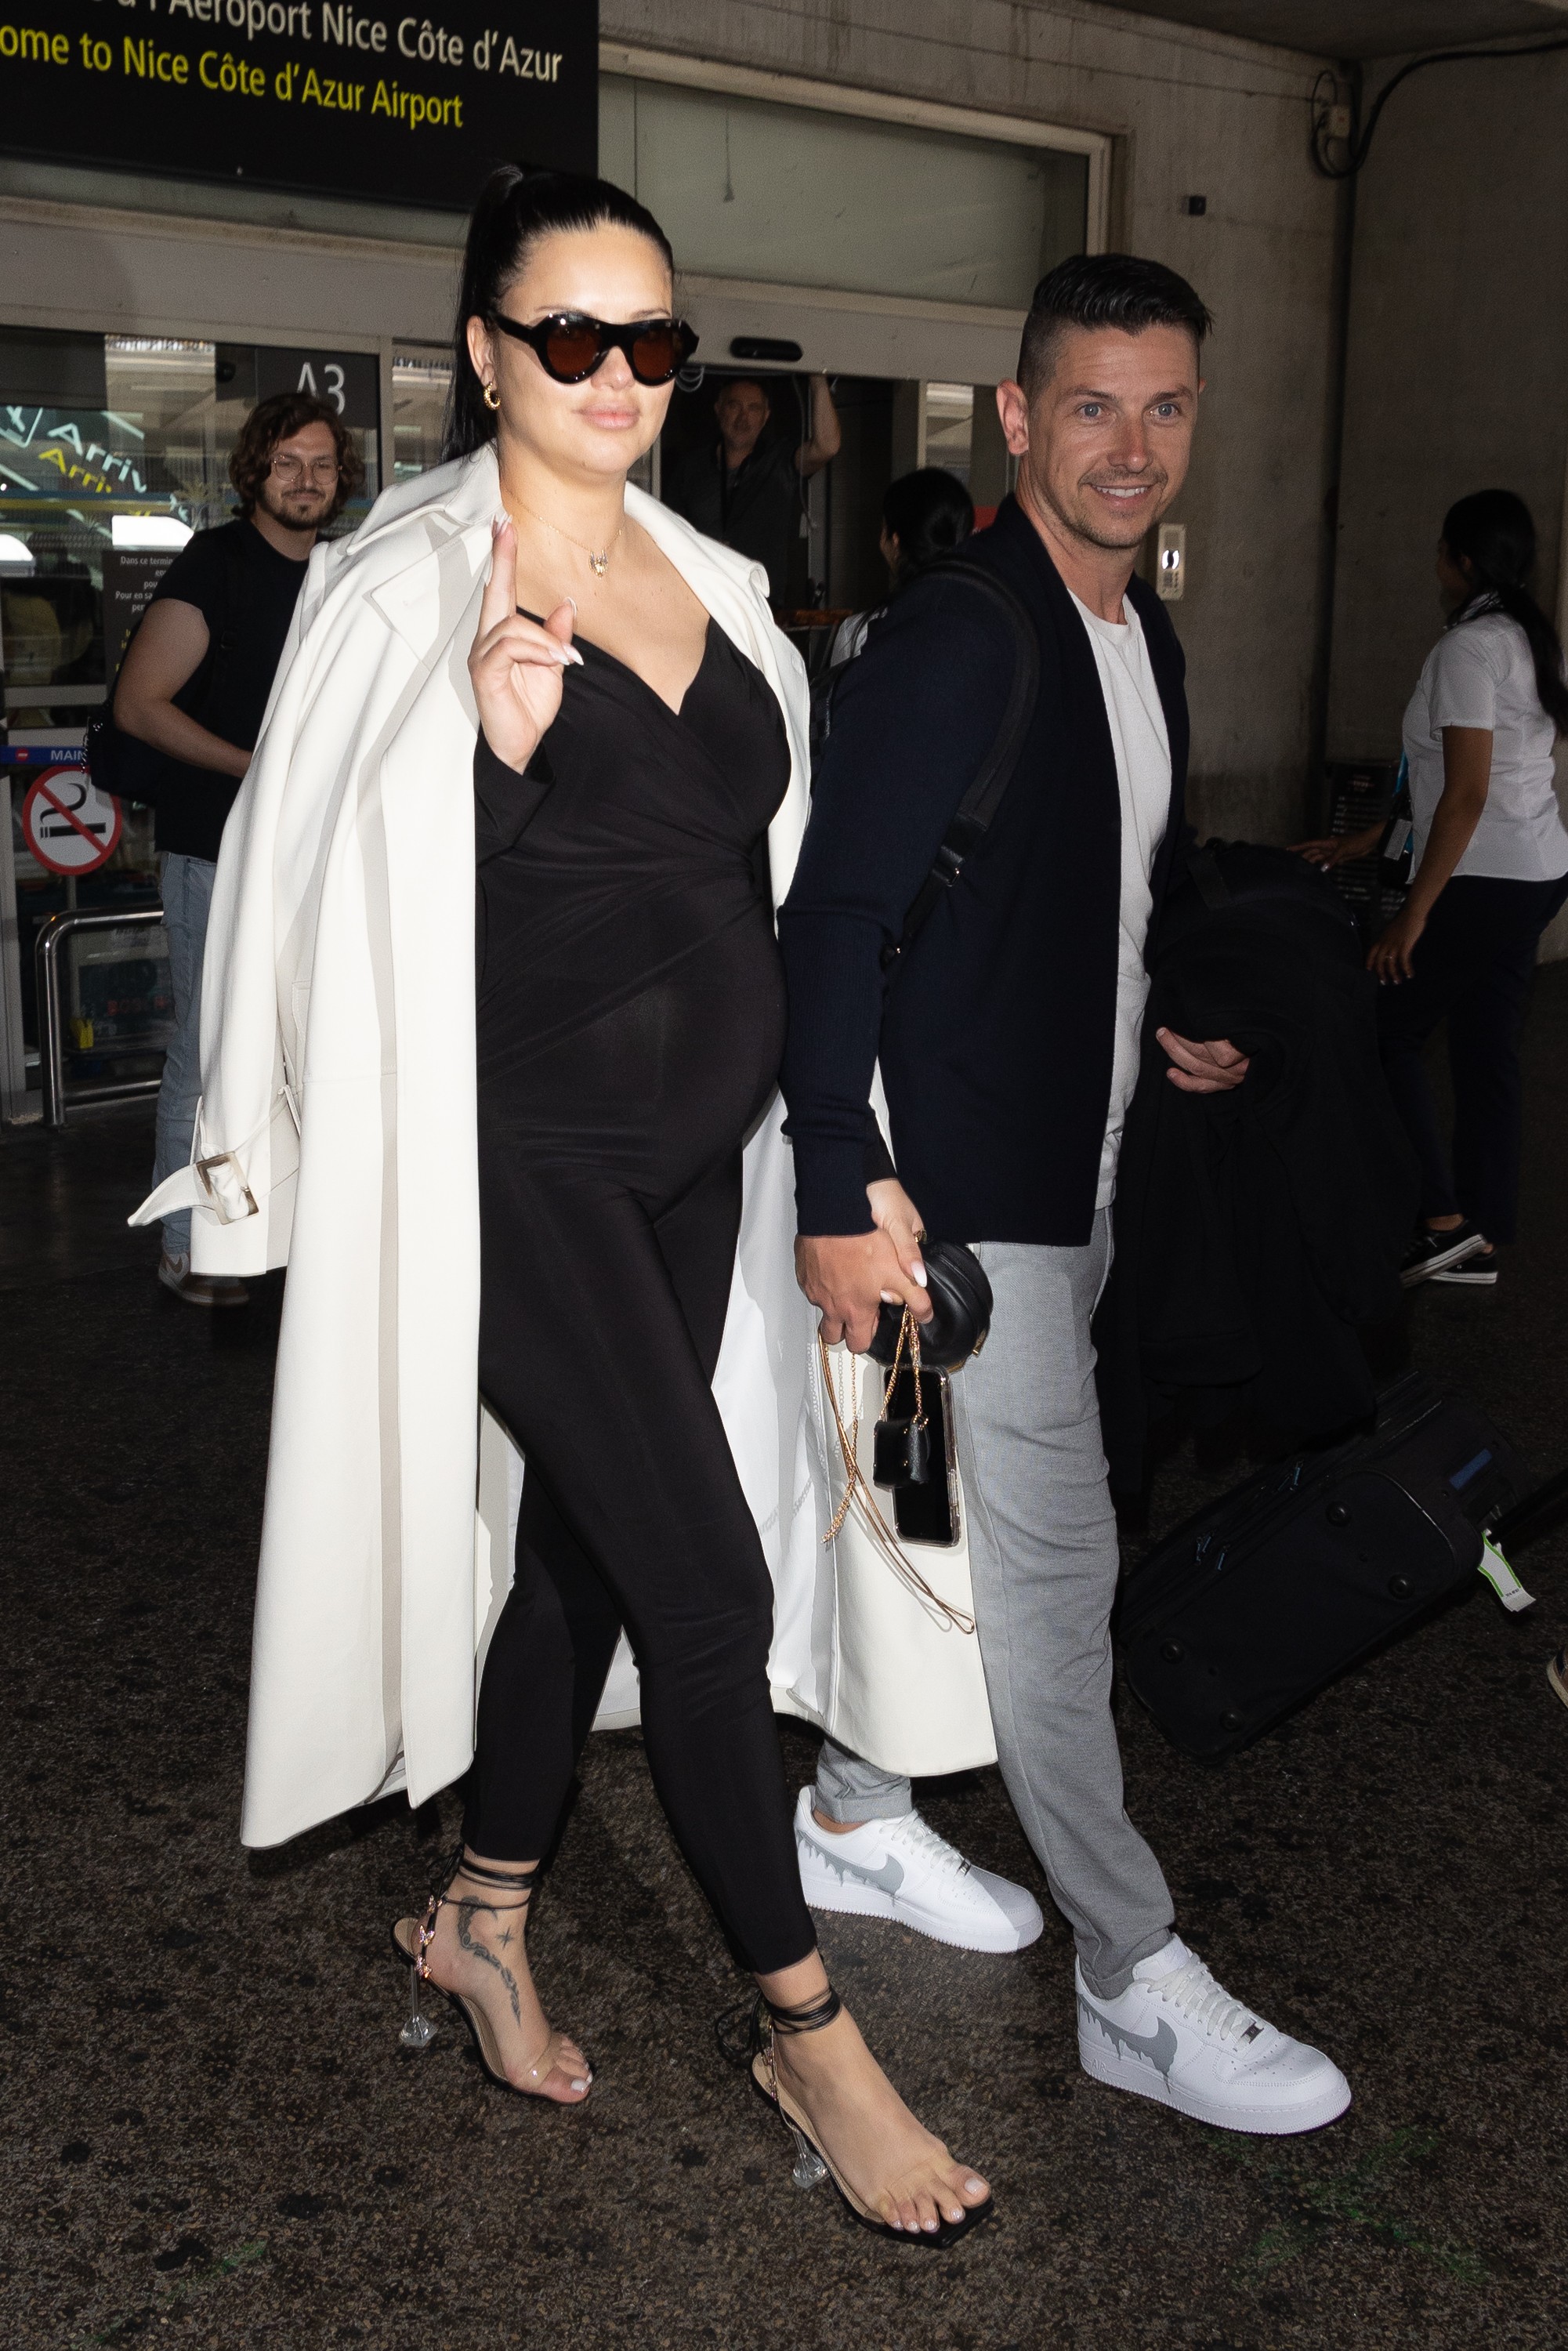 NICE, FRANCE - MAY 16: Model Adriana Lima and Andre Lemmers are seen arriving ahead of the 75th annual Cannes film festival at Nice Airport on May 16, 2022 in Nice, France. (Photo by Marc Piasecki/GC Images) (Foto: GC Images)